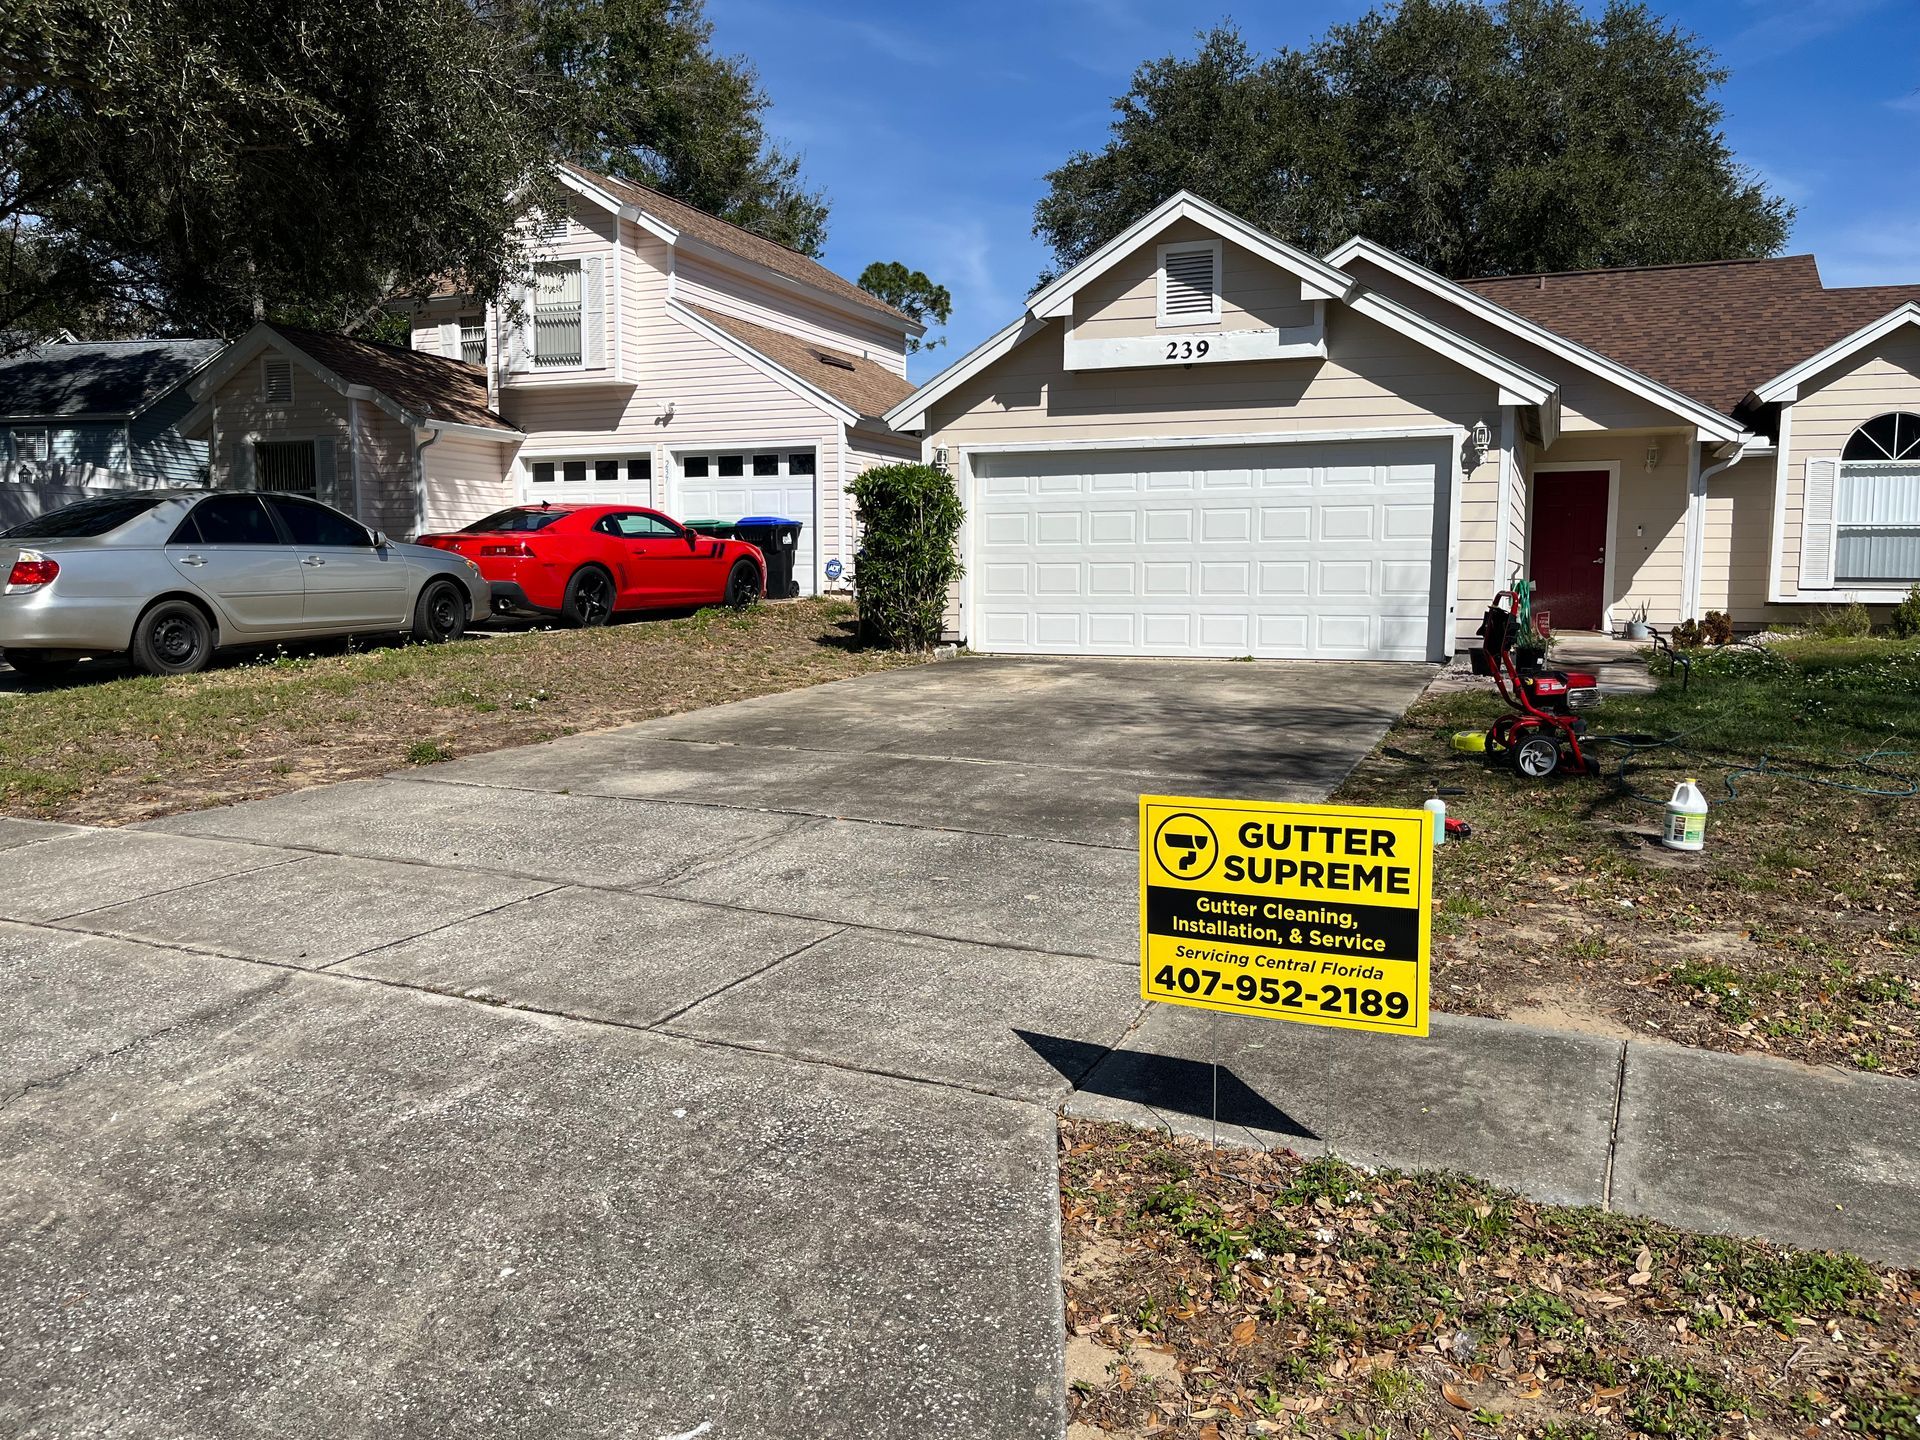 A house with a yellow sign in front of it.